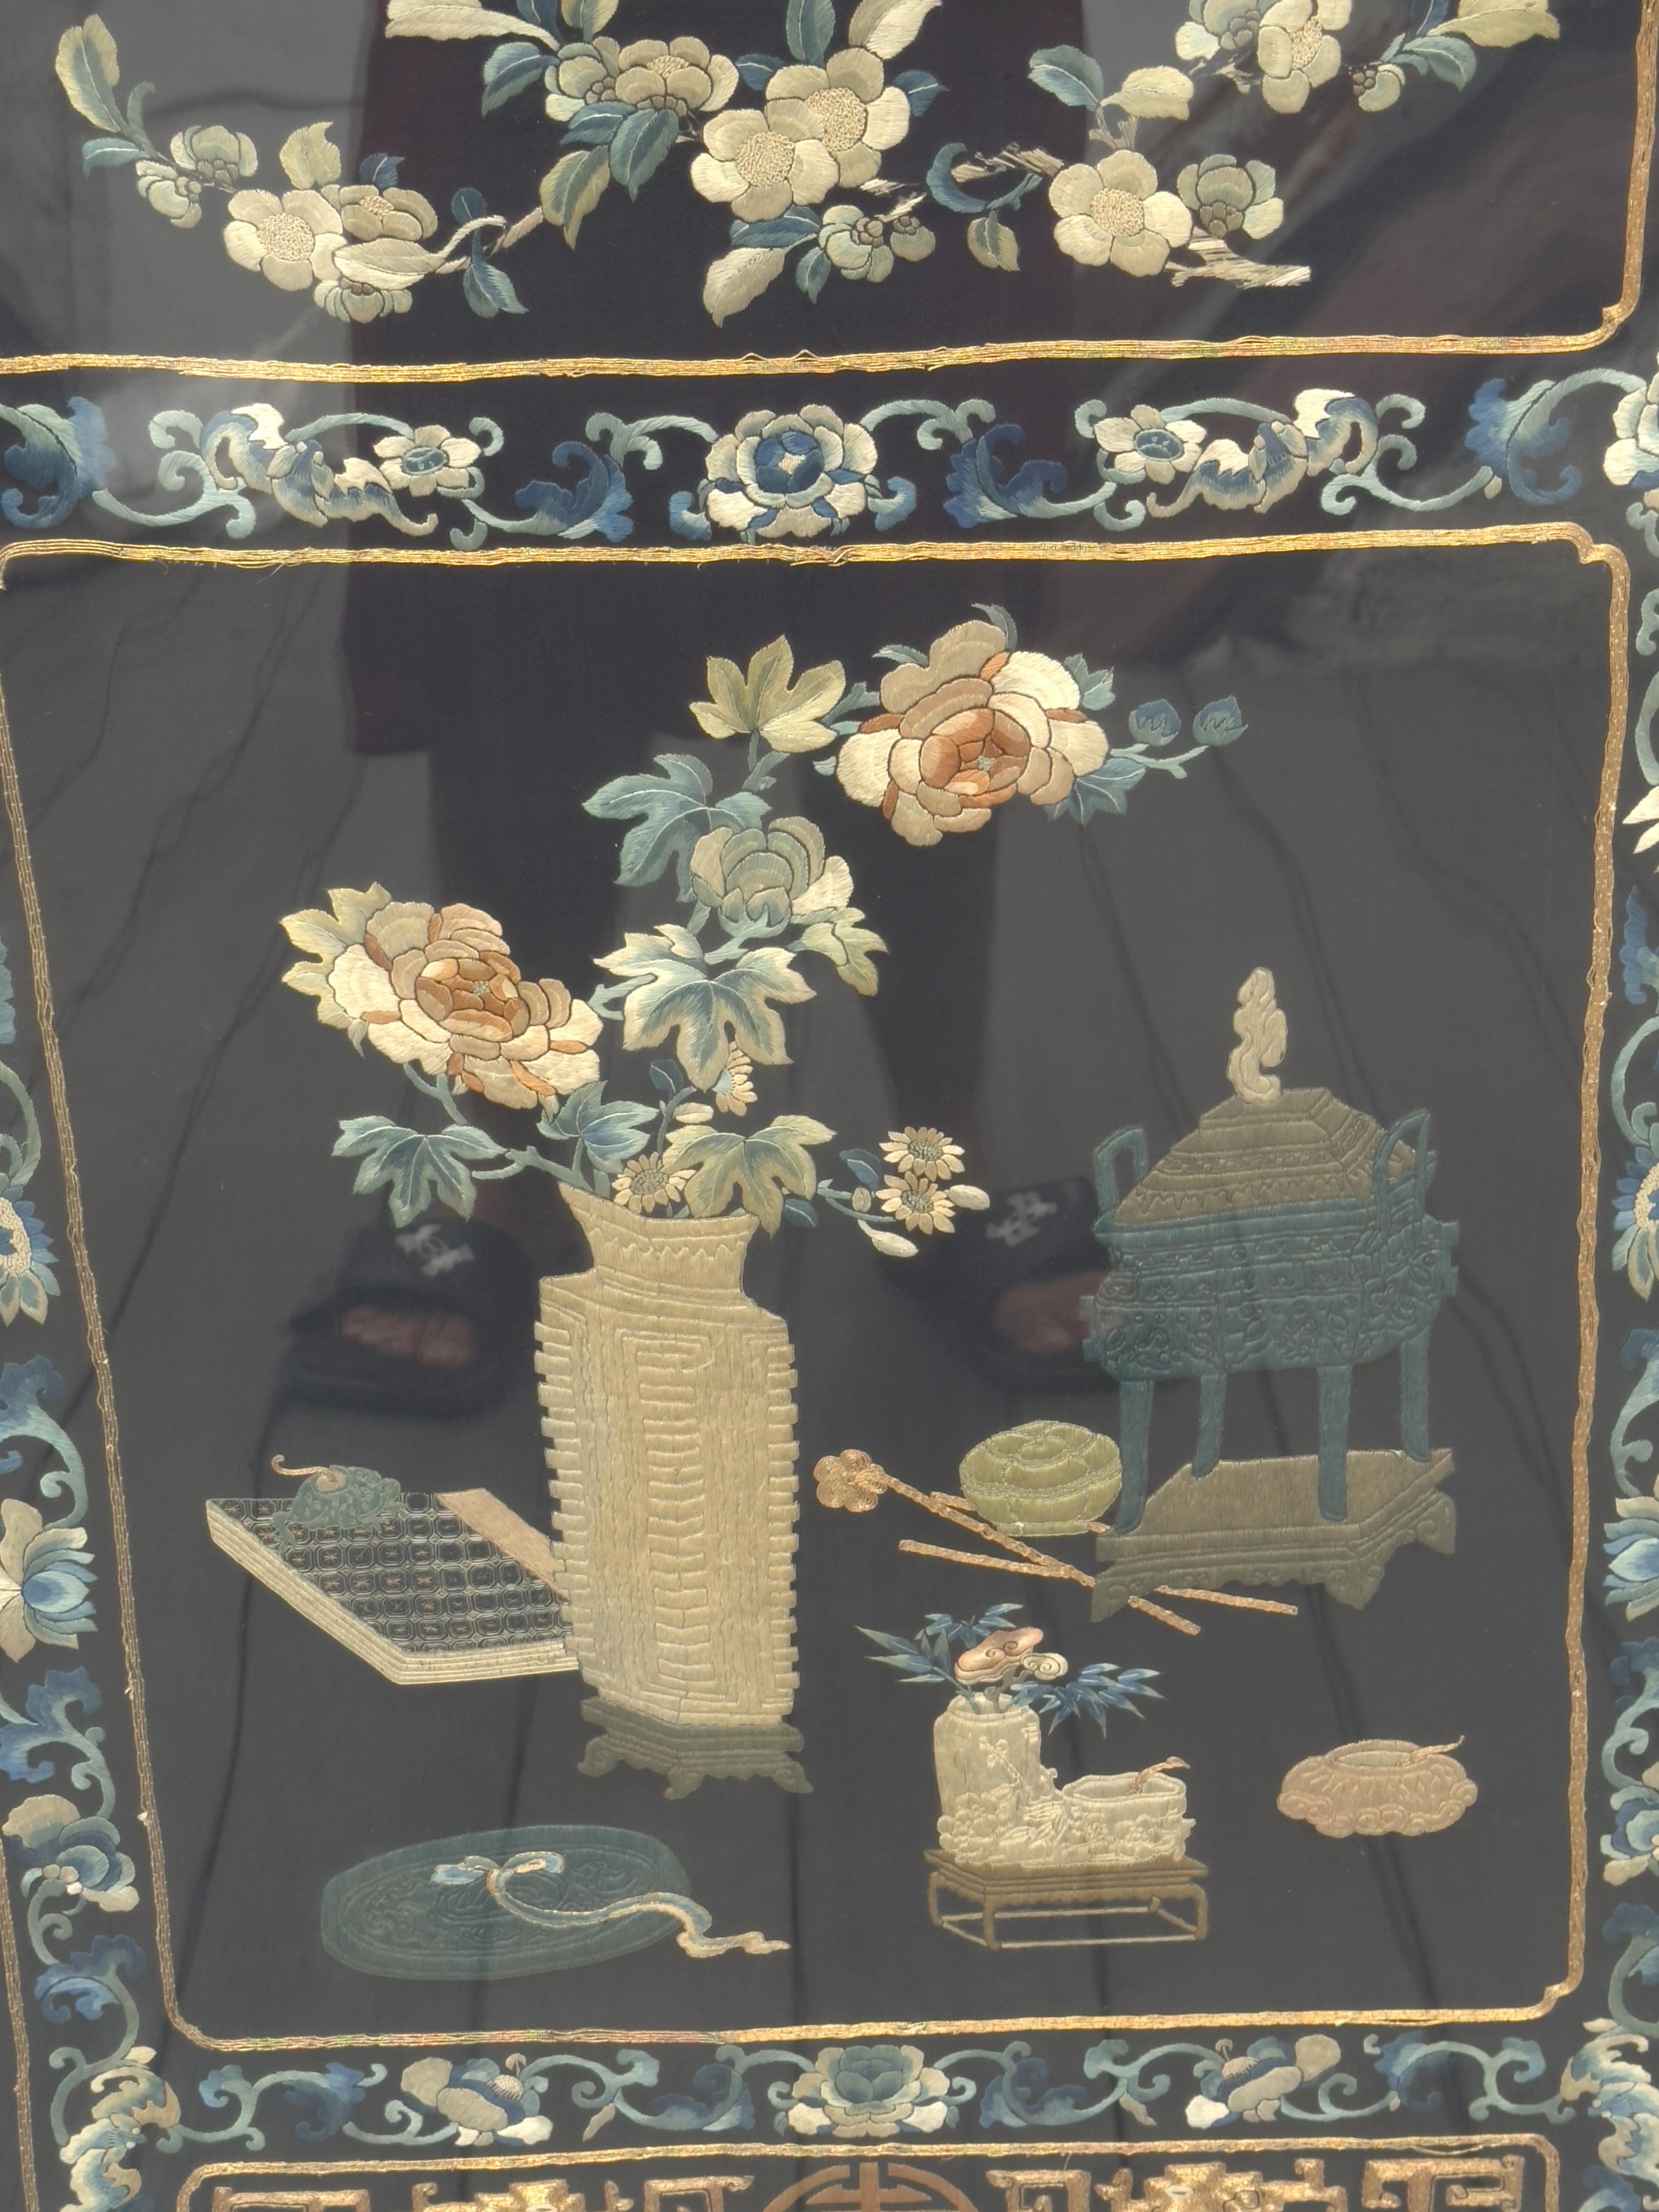 Embroidered Exceptional Antique Chinese Silk Table Cover Qing Period 100 Objects Subject For Sale